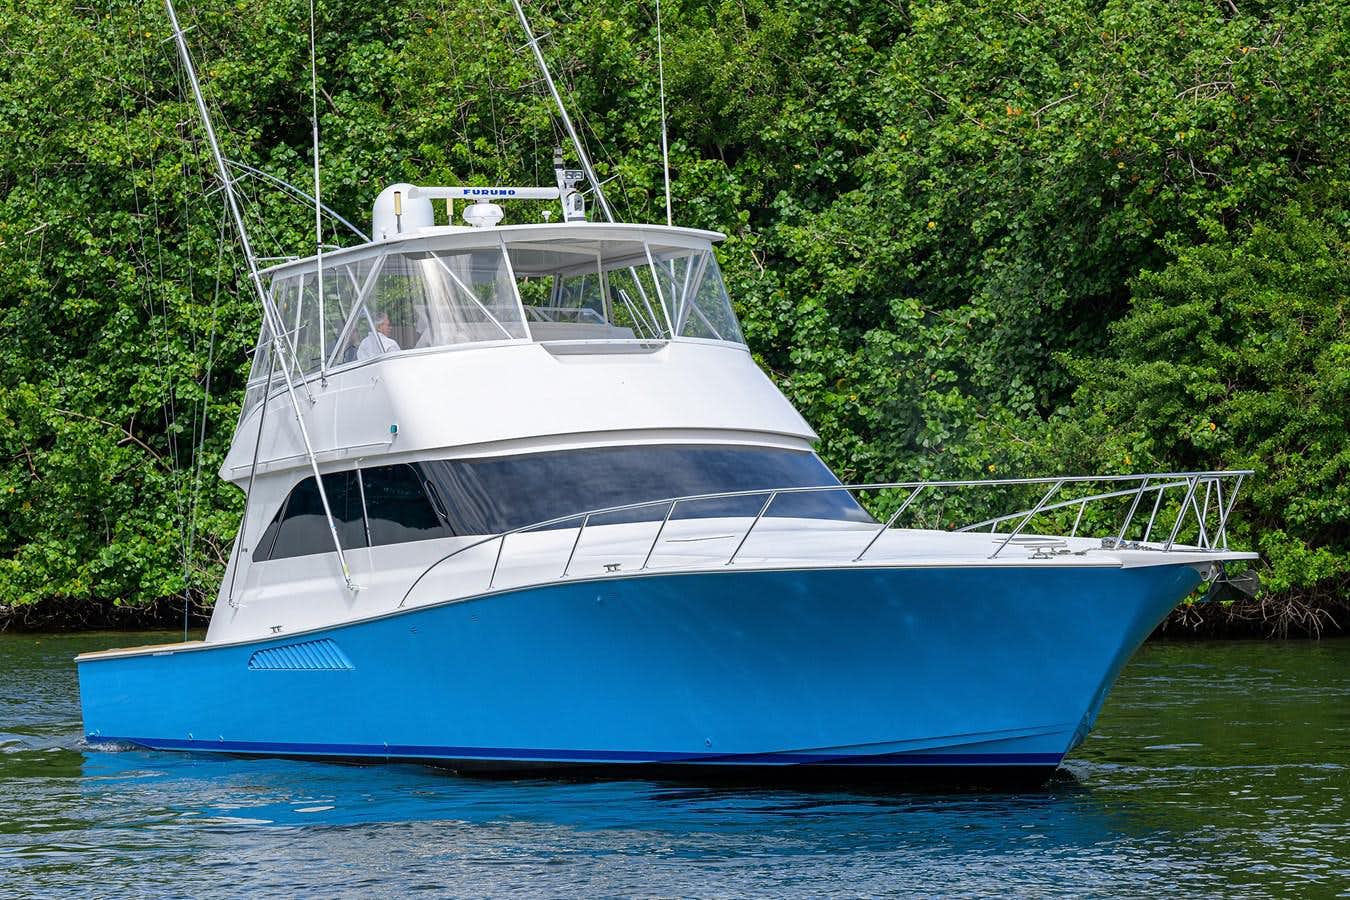 Blue eyes
Yacht for Sale